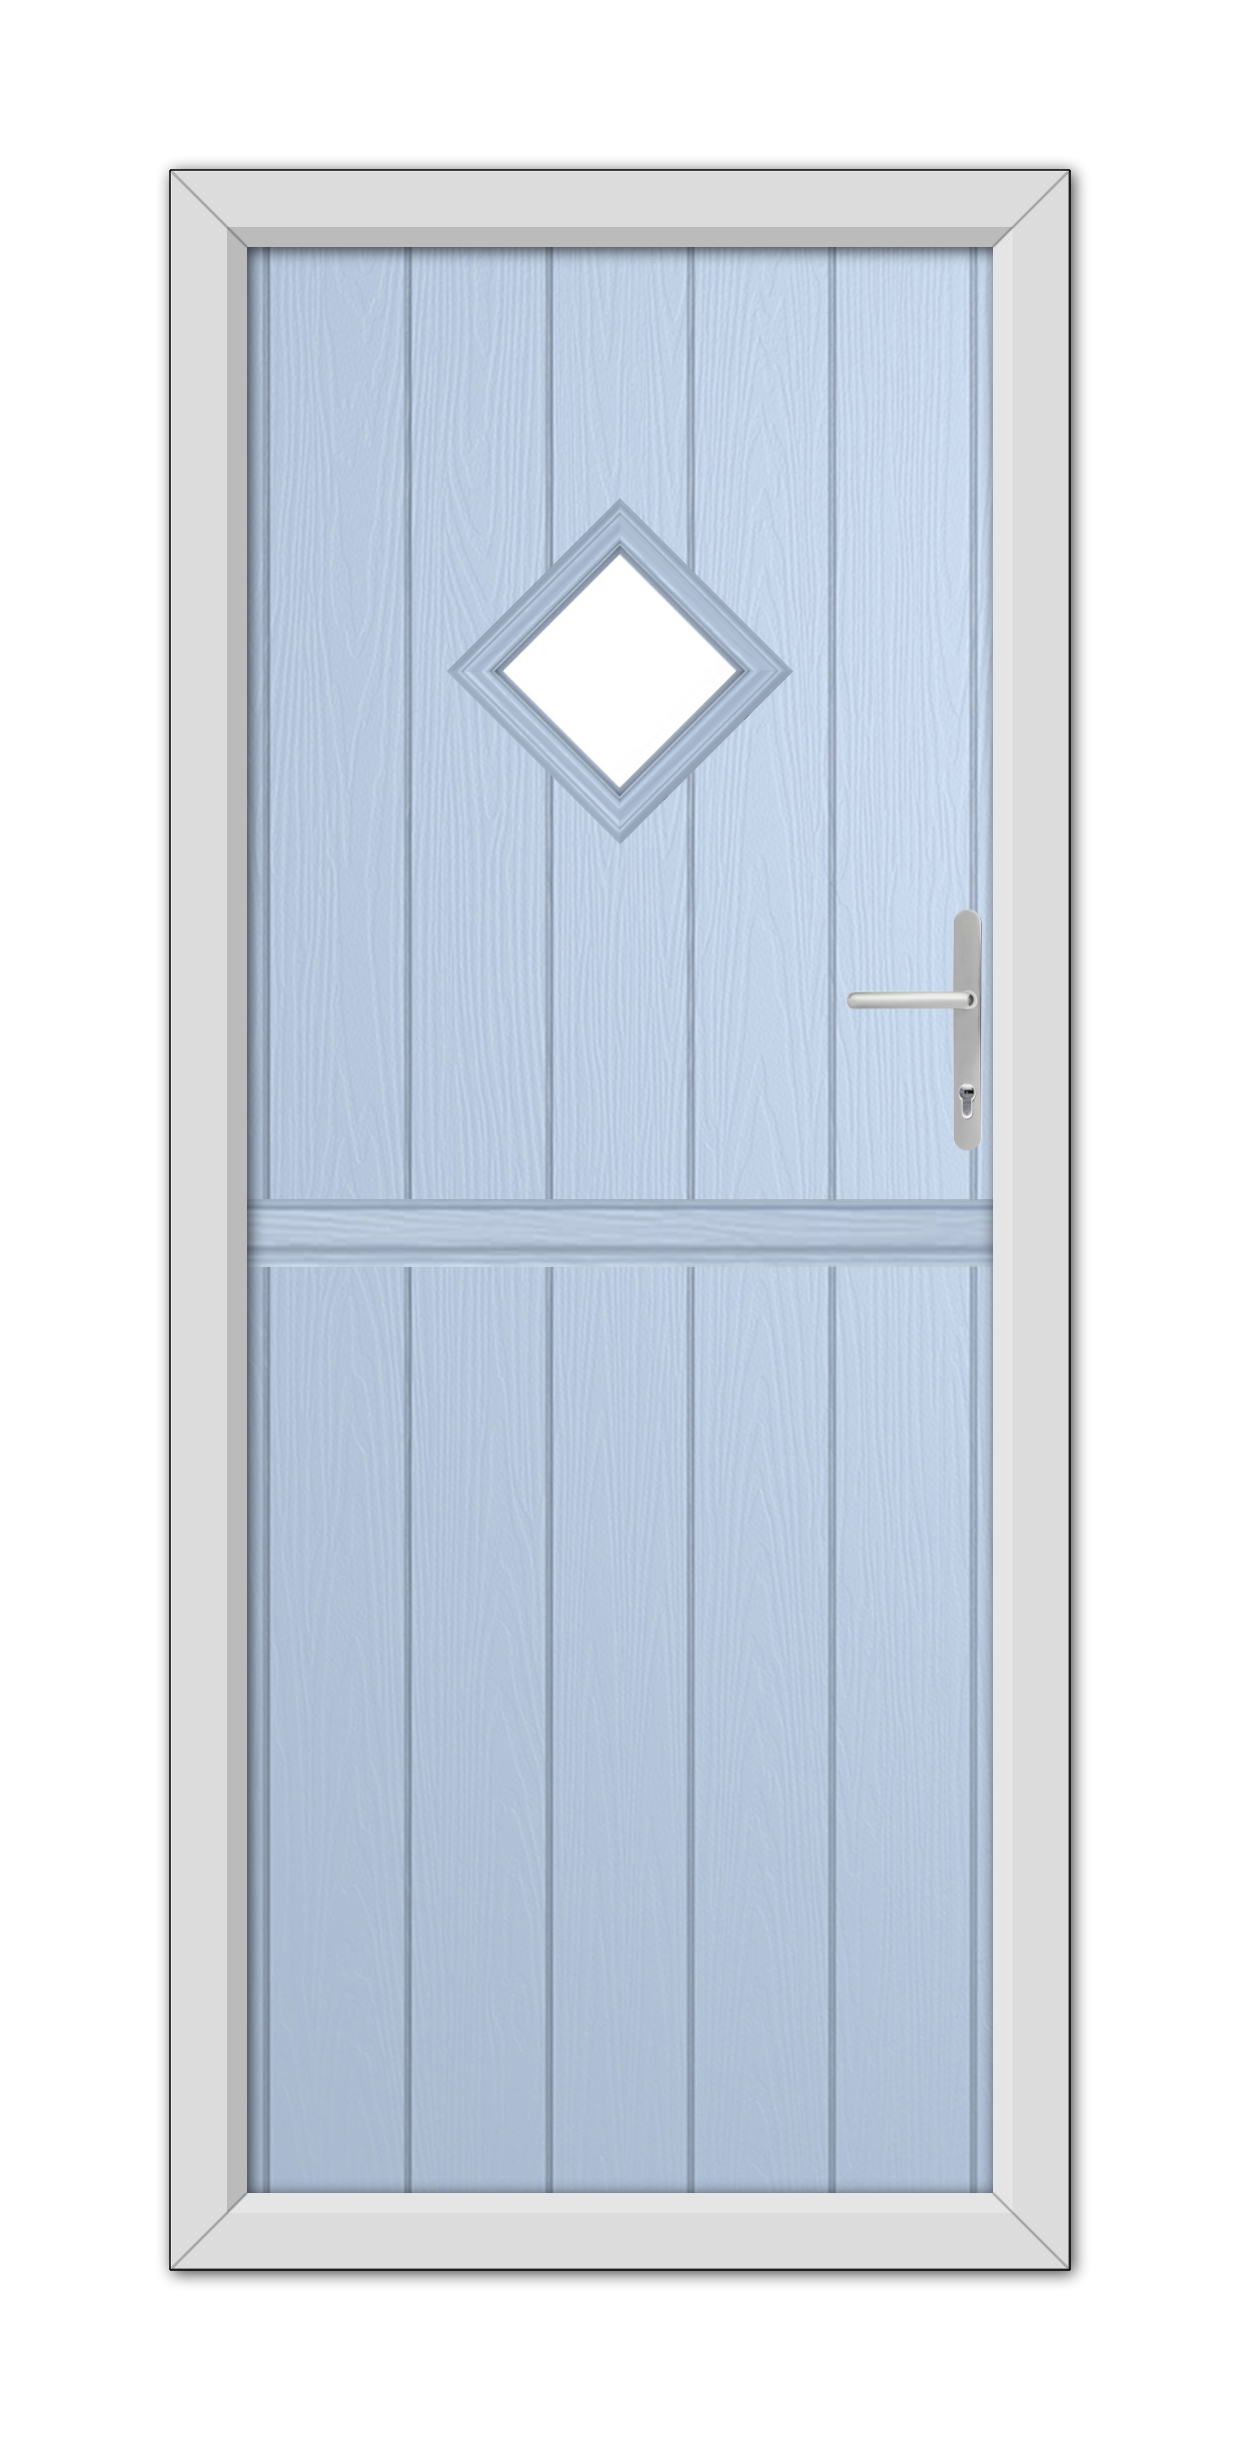 A Duck Egg Blue Cornwall Stable Composite Door with a small diamond-shaped window at the top and silver handle, set in a white frame.